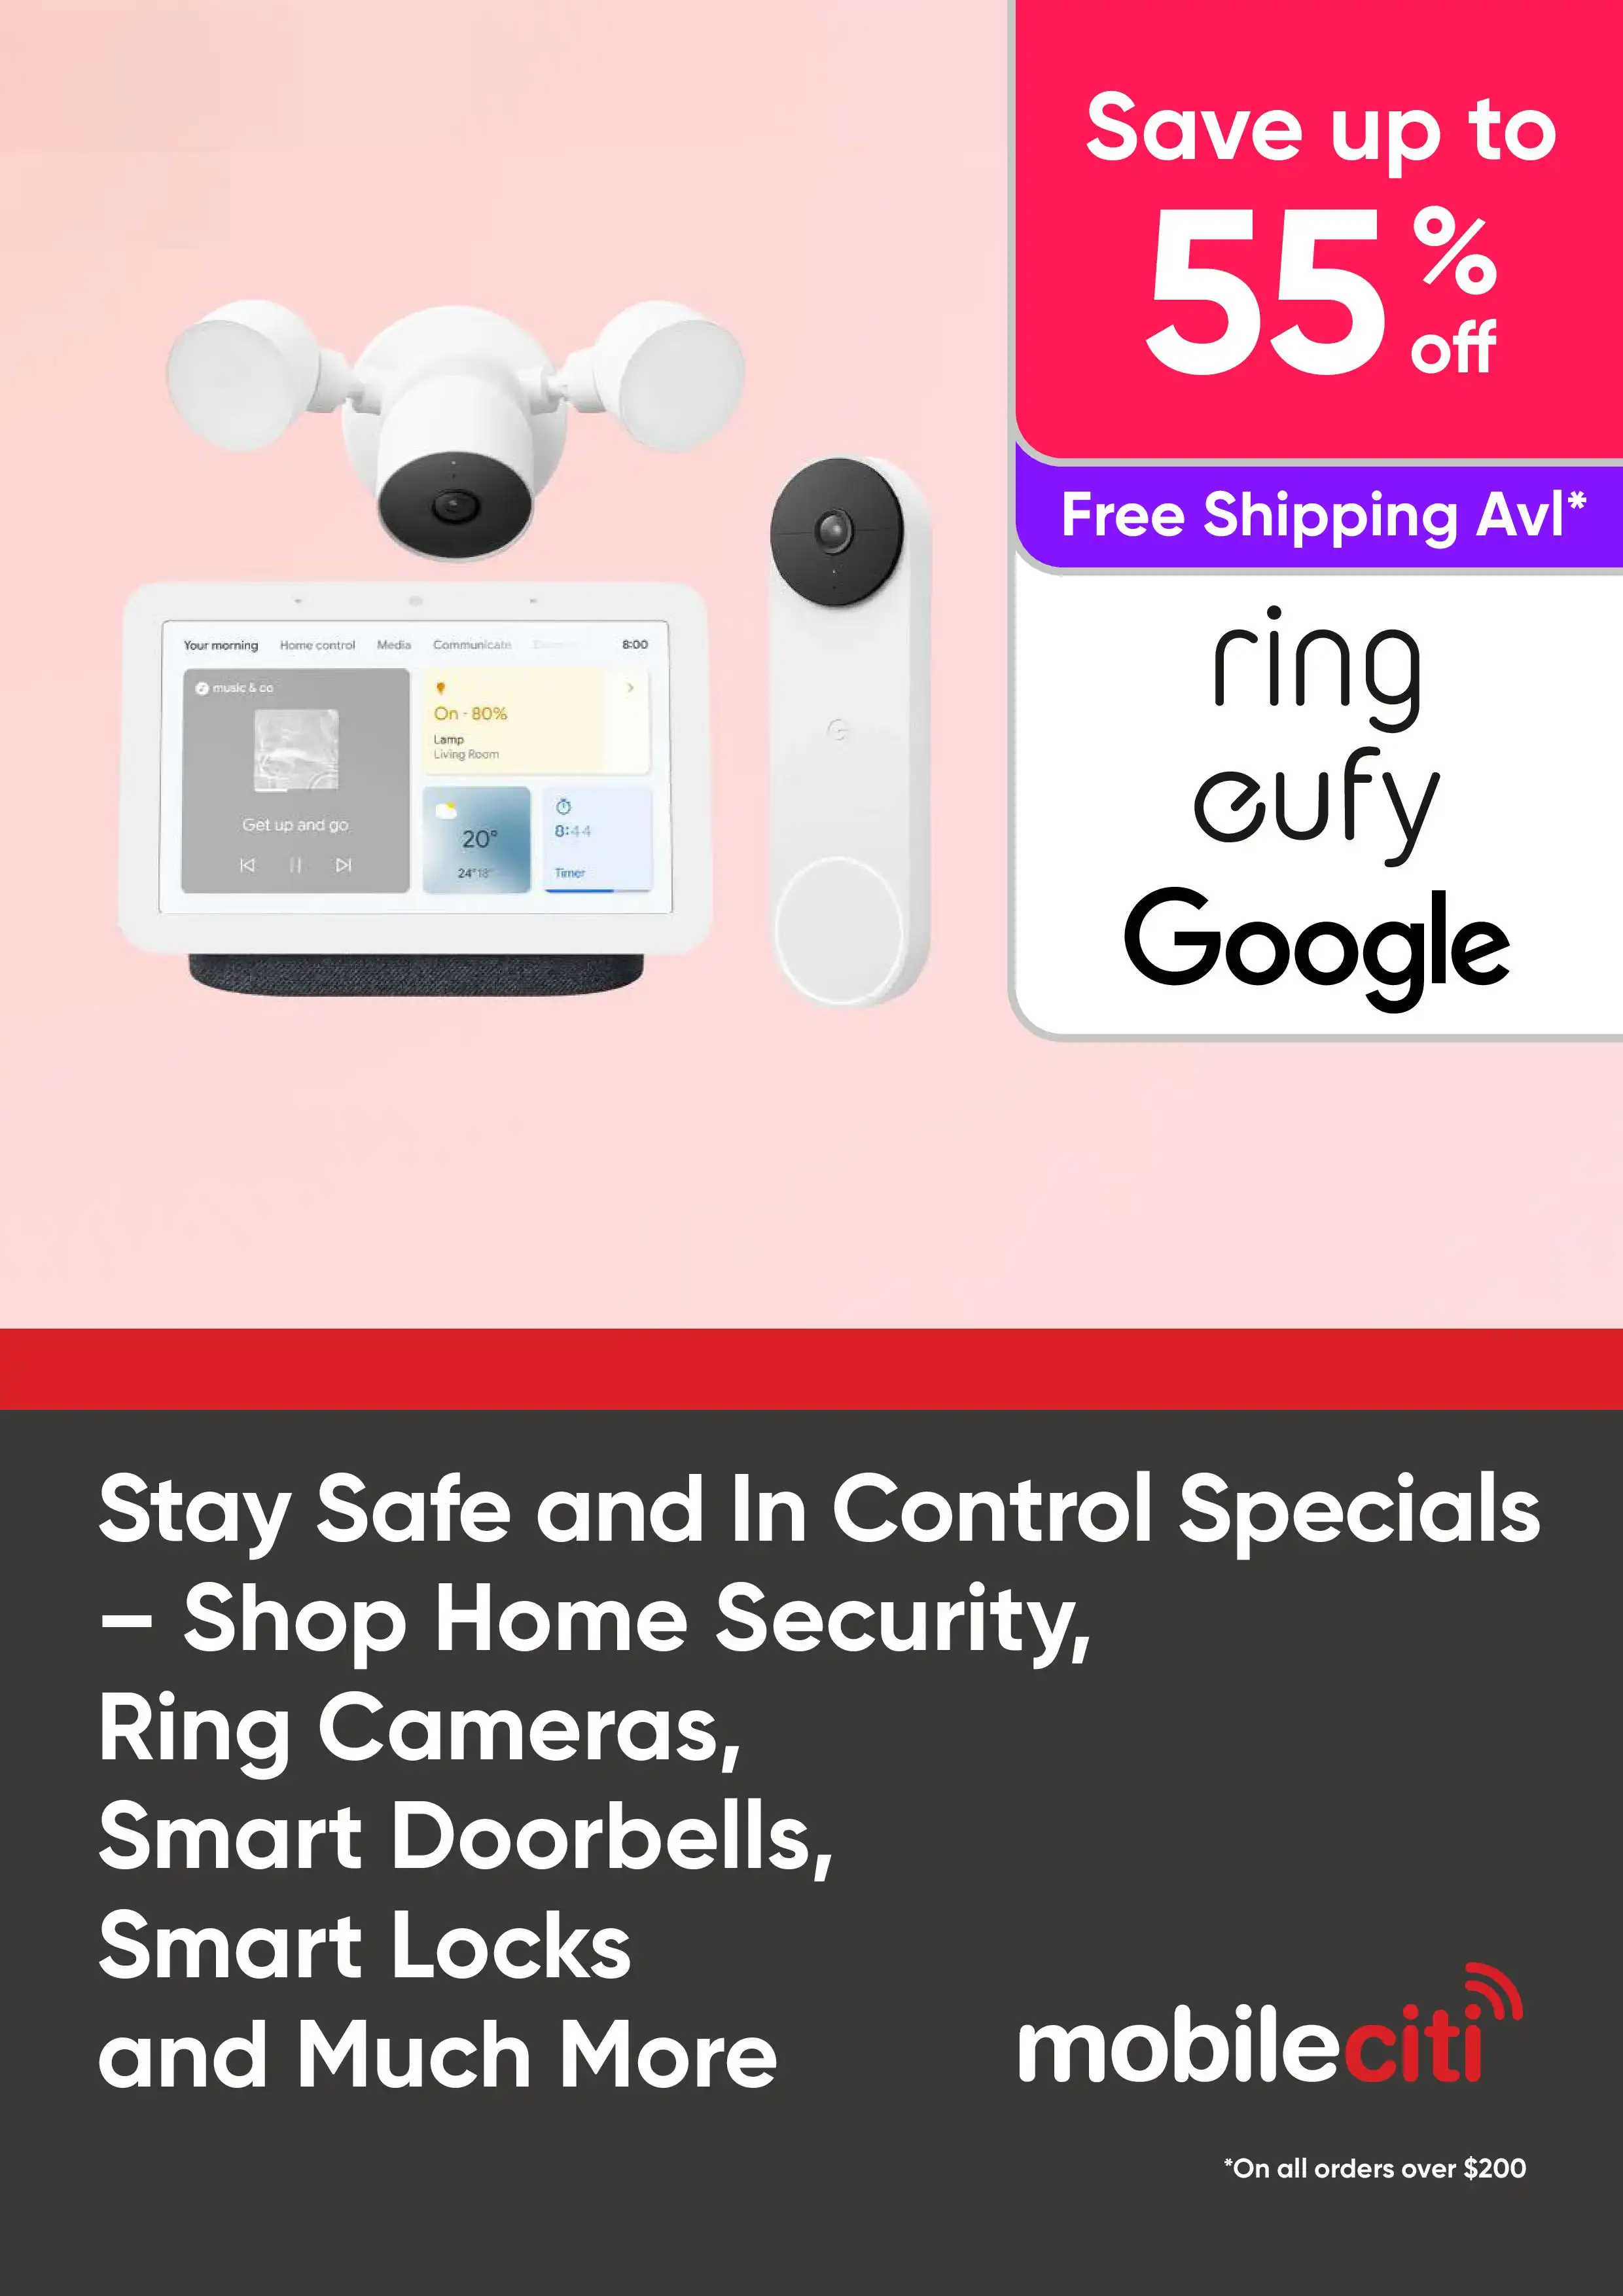 Stay Safe and In Control Specials - Save Up to 55% Off Home Security, Ring Cameras, Smart Doorbells, Smart Locks and Much More